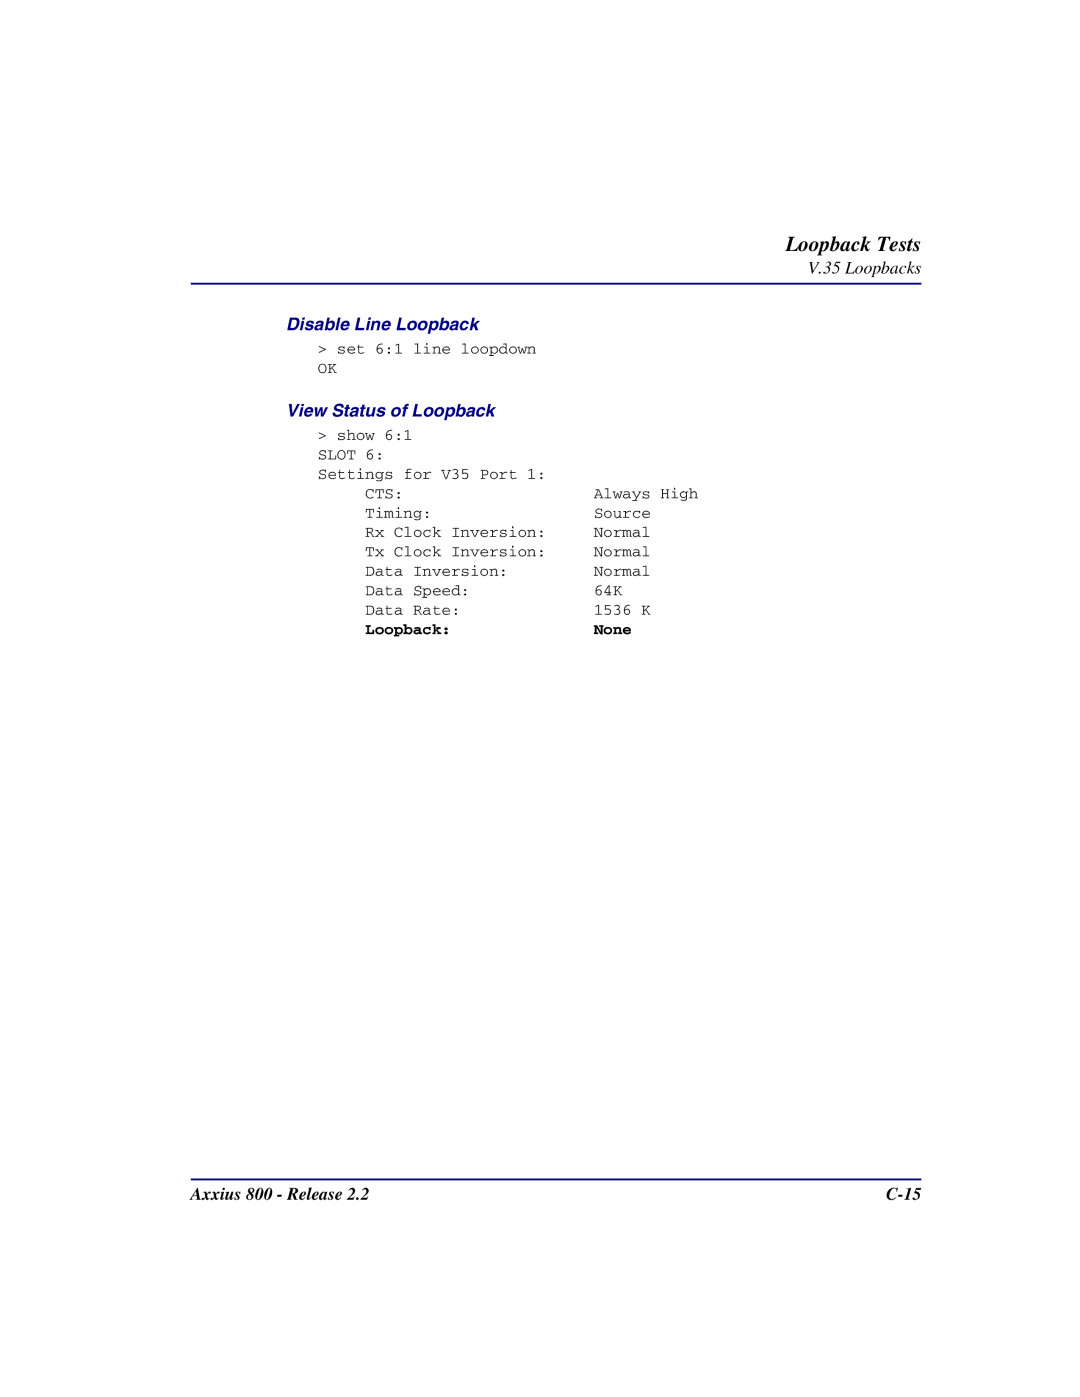 Carrier Access Axxius 800 user manual Loopback None 